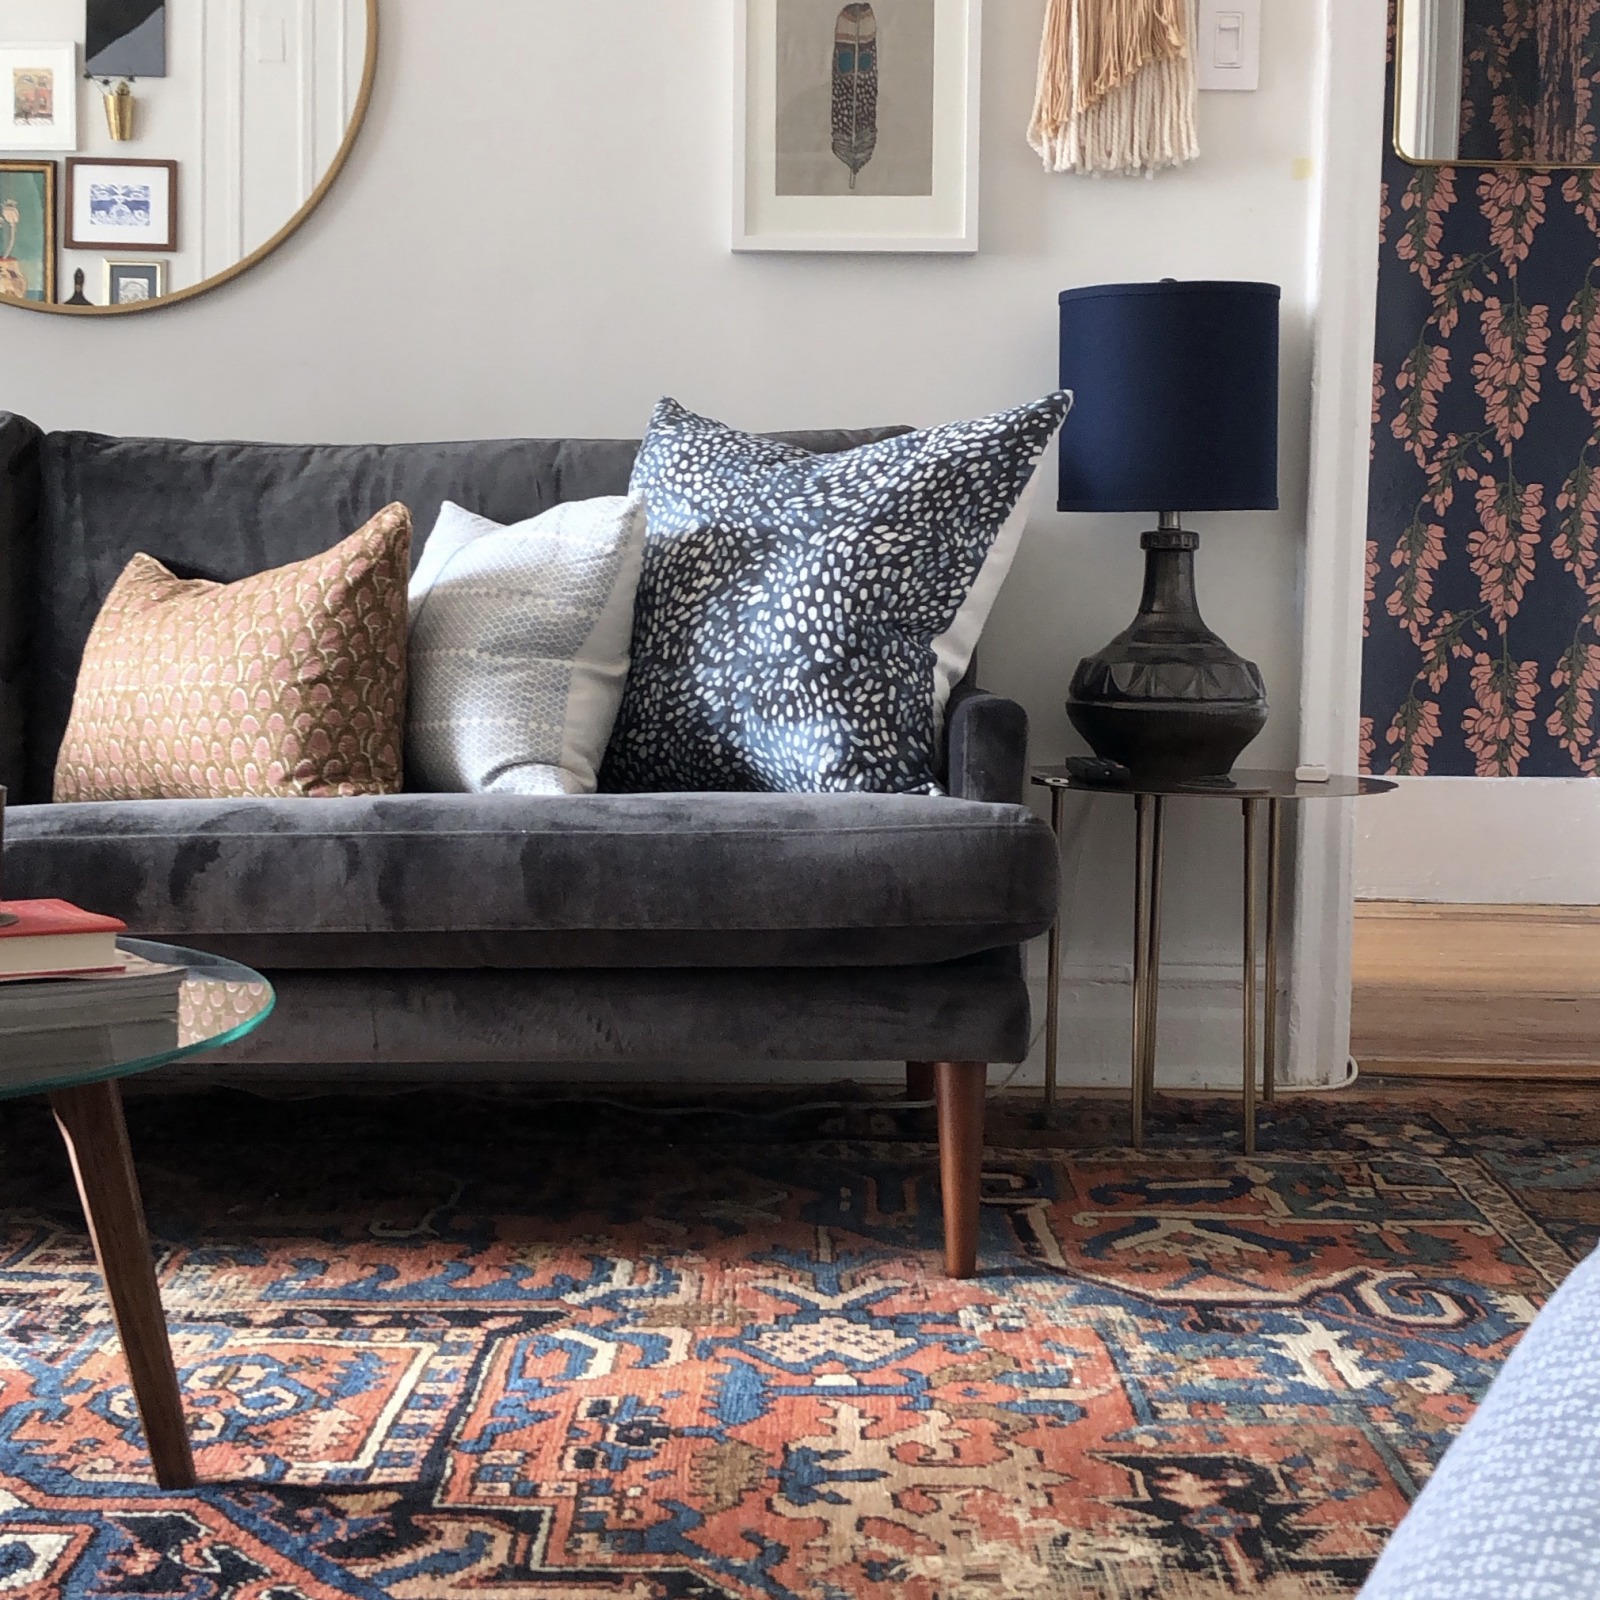 How To Choose The Right Rug For Your, How To Choose The Right Size Area Rug For Living Room